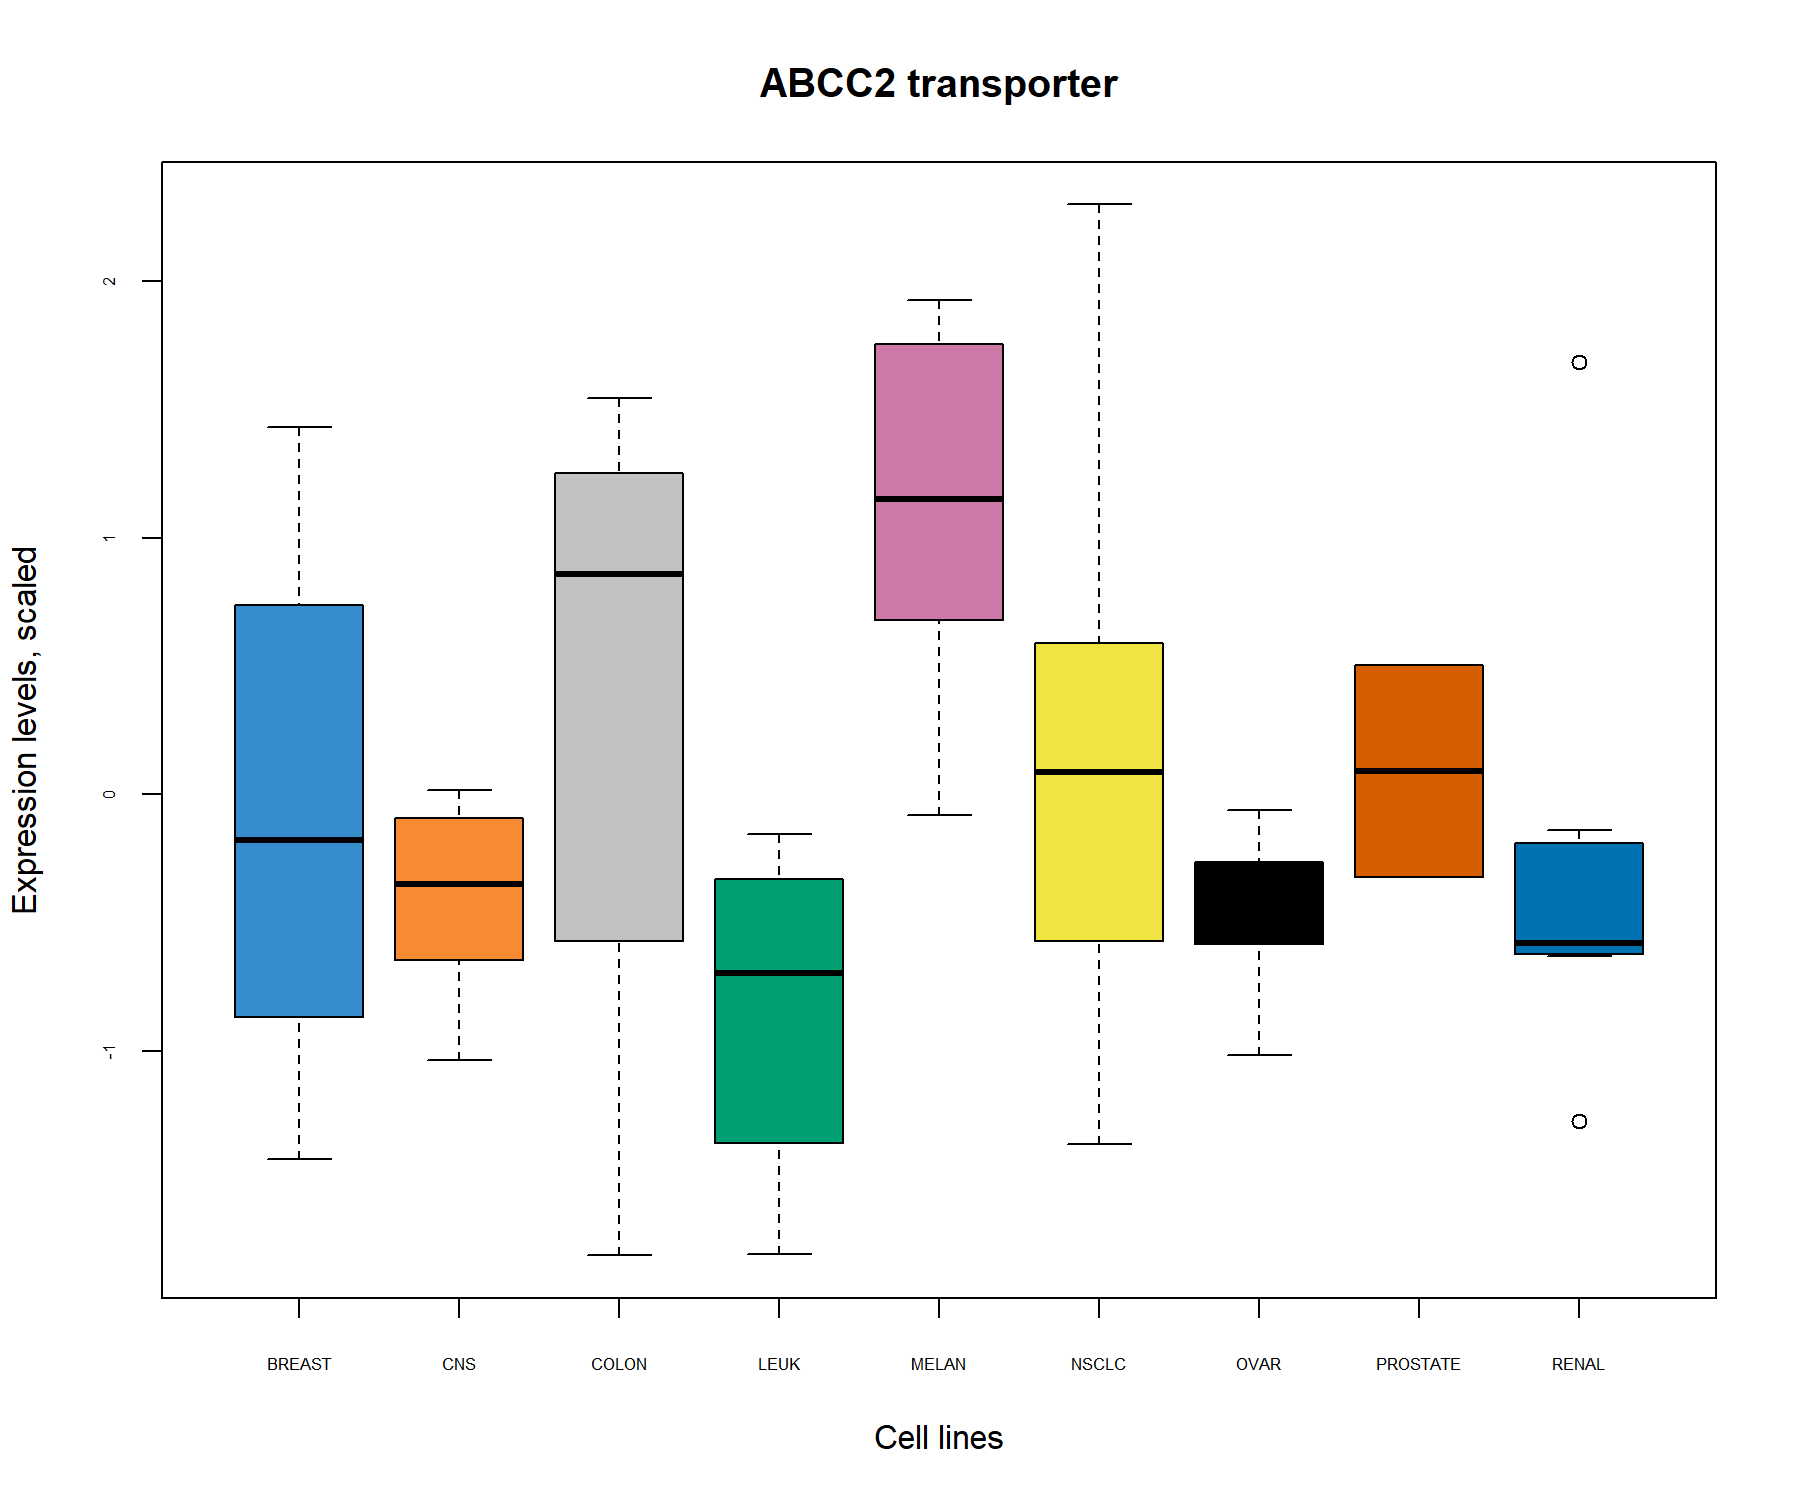 Boxplots of the transporter ABCC2 identified from the PCA correlation circle plot (Fig. 3.3) and the biplot (Fig. 3.4) show the level of ABCC2 expression related to cell line types. The expression level of ABCC2 was centered and scaled in the PCA, but similar patterns are also observed in the original data.